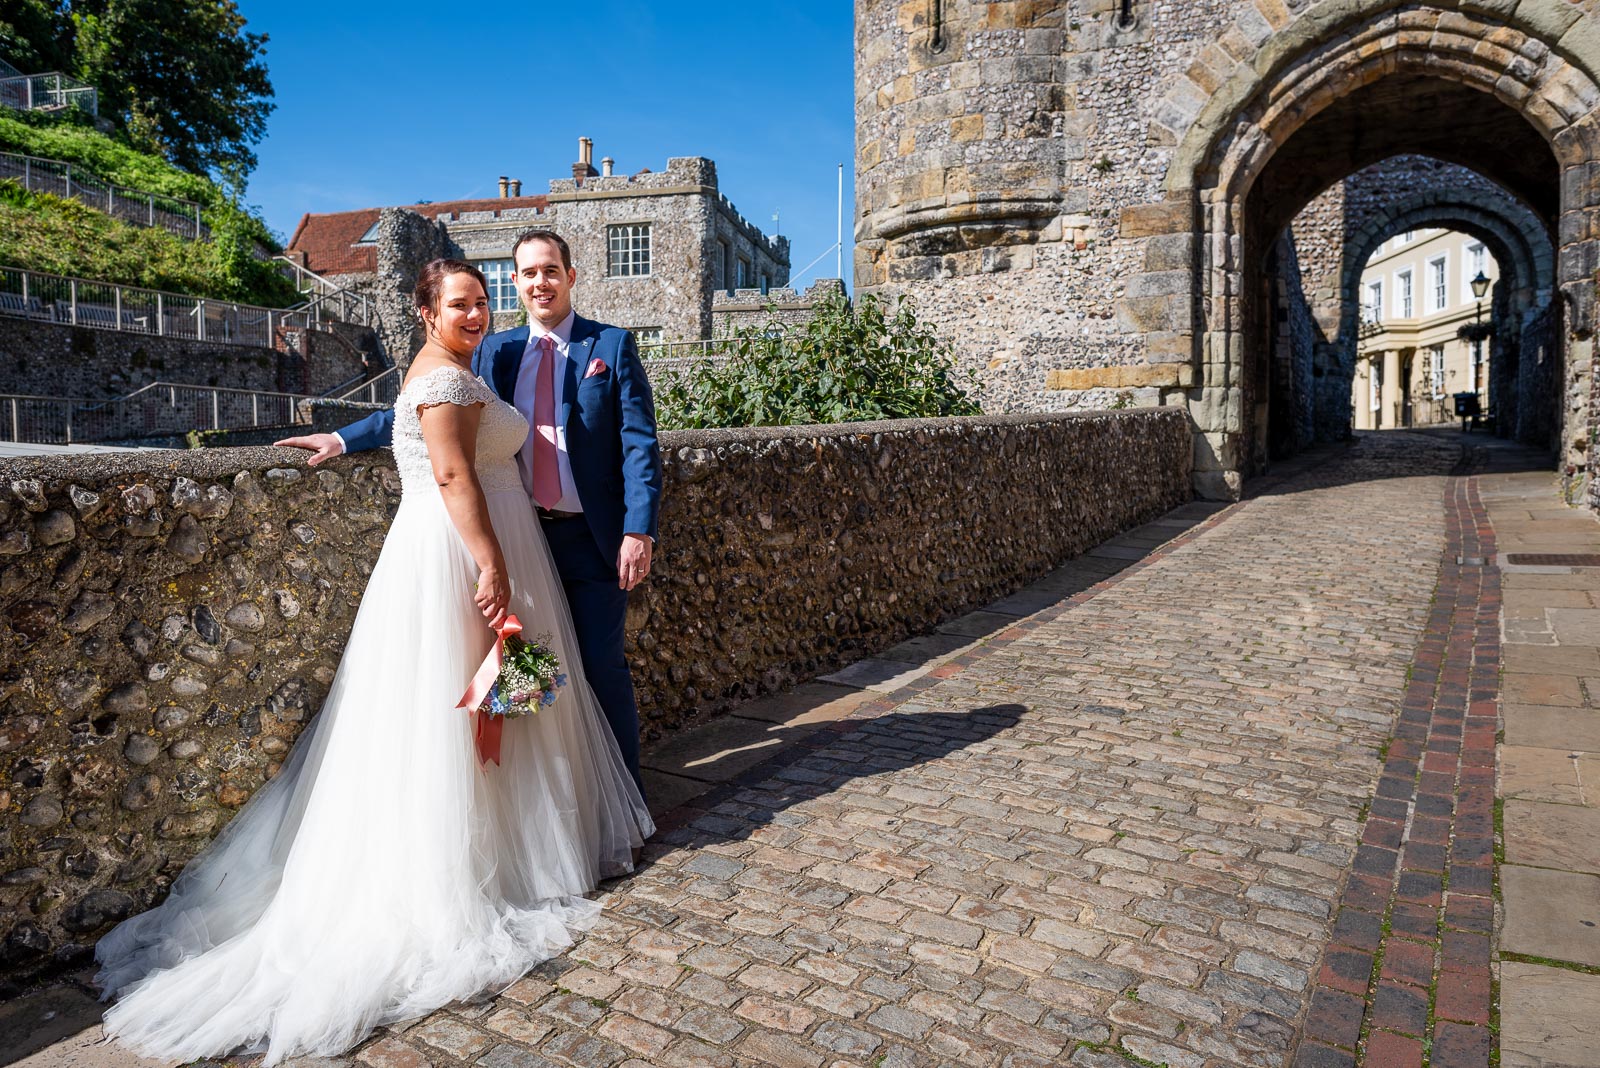 Amy and James pose outside Lewes Castle after their Wedding.